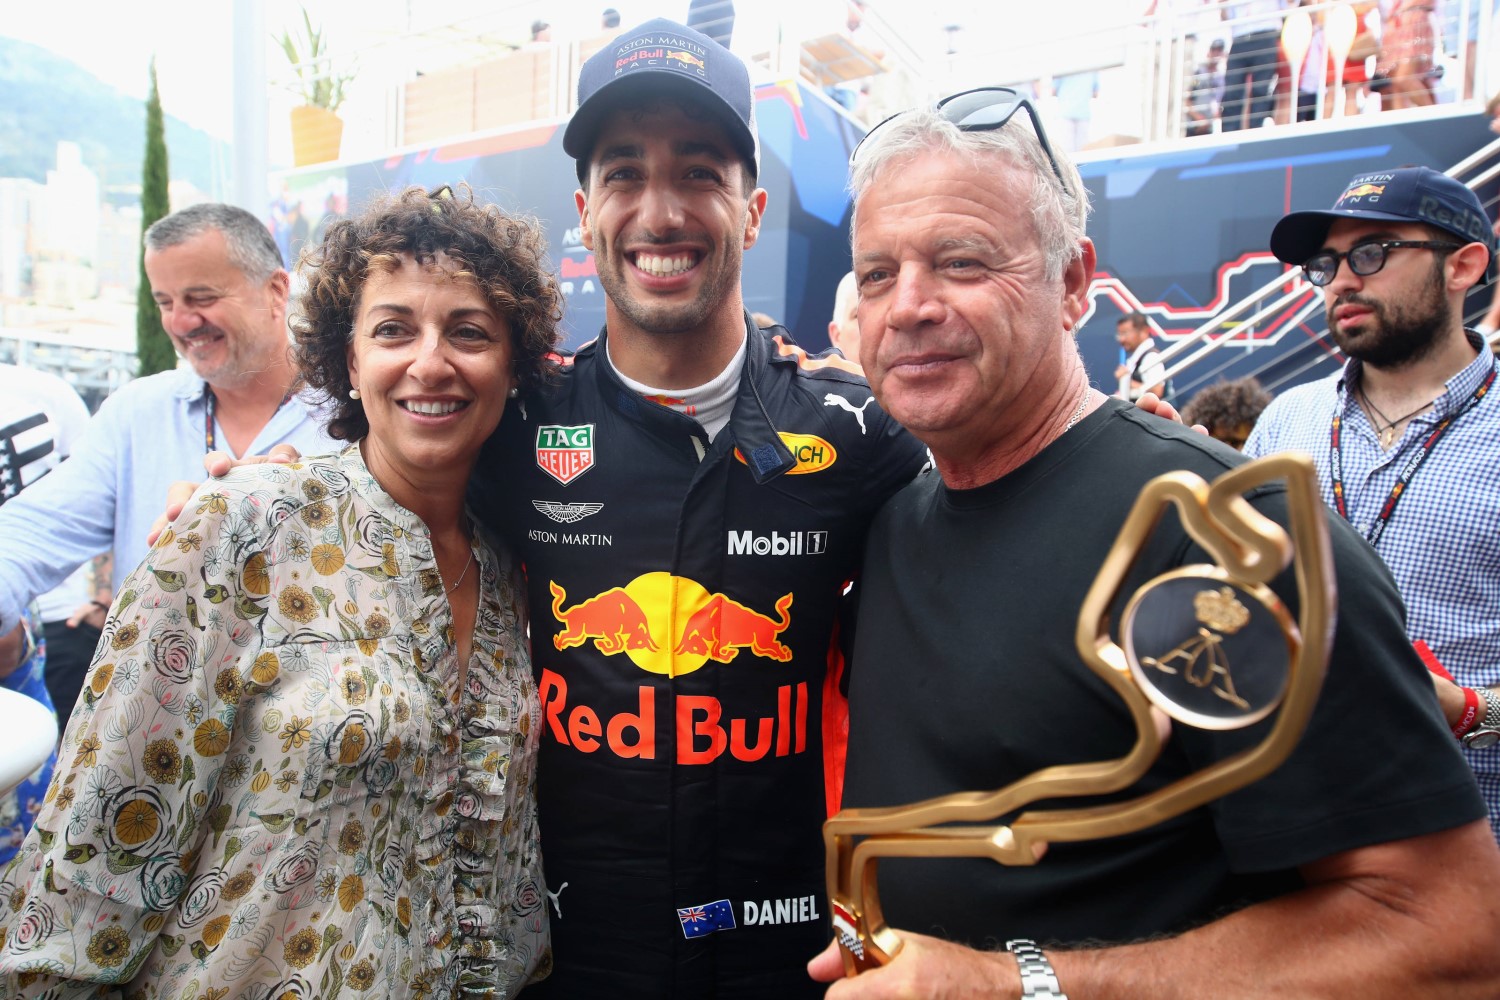 Daniel Ricciardo with his Italian parents Grace and Joe, will earn triple what Red Bull would pay him